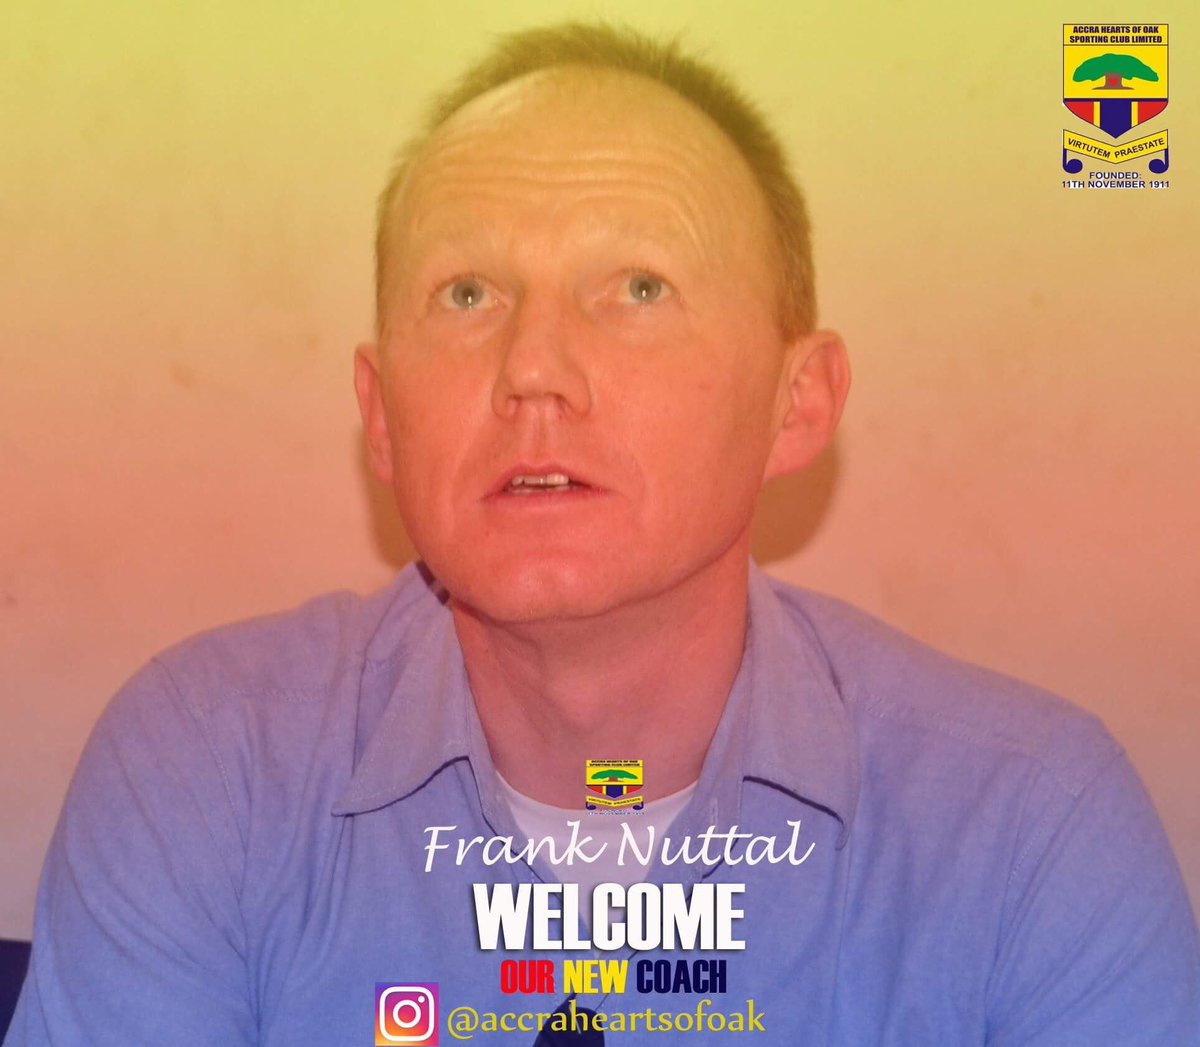 OFFICIAL: Hearts of Oak announce Frank Nuttal signing as coach